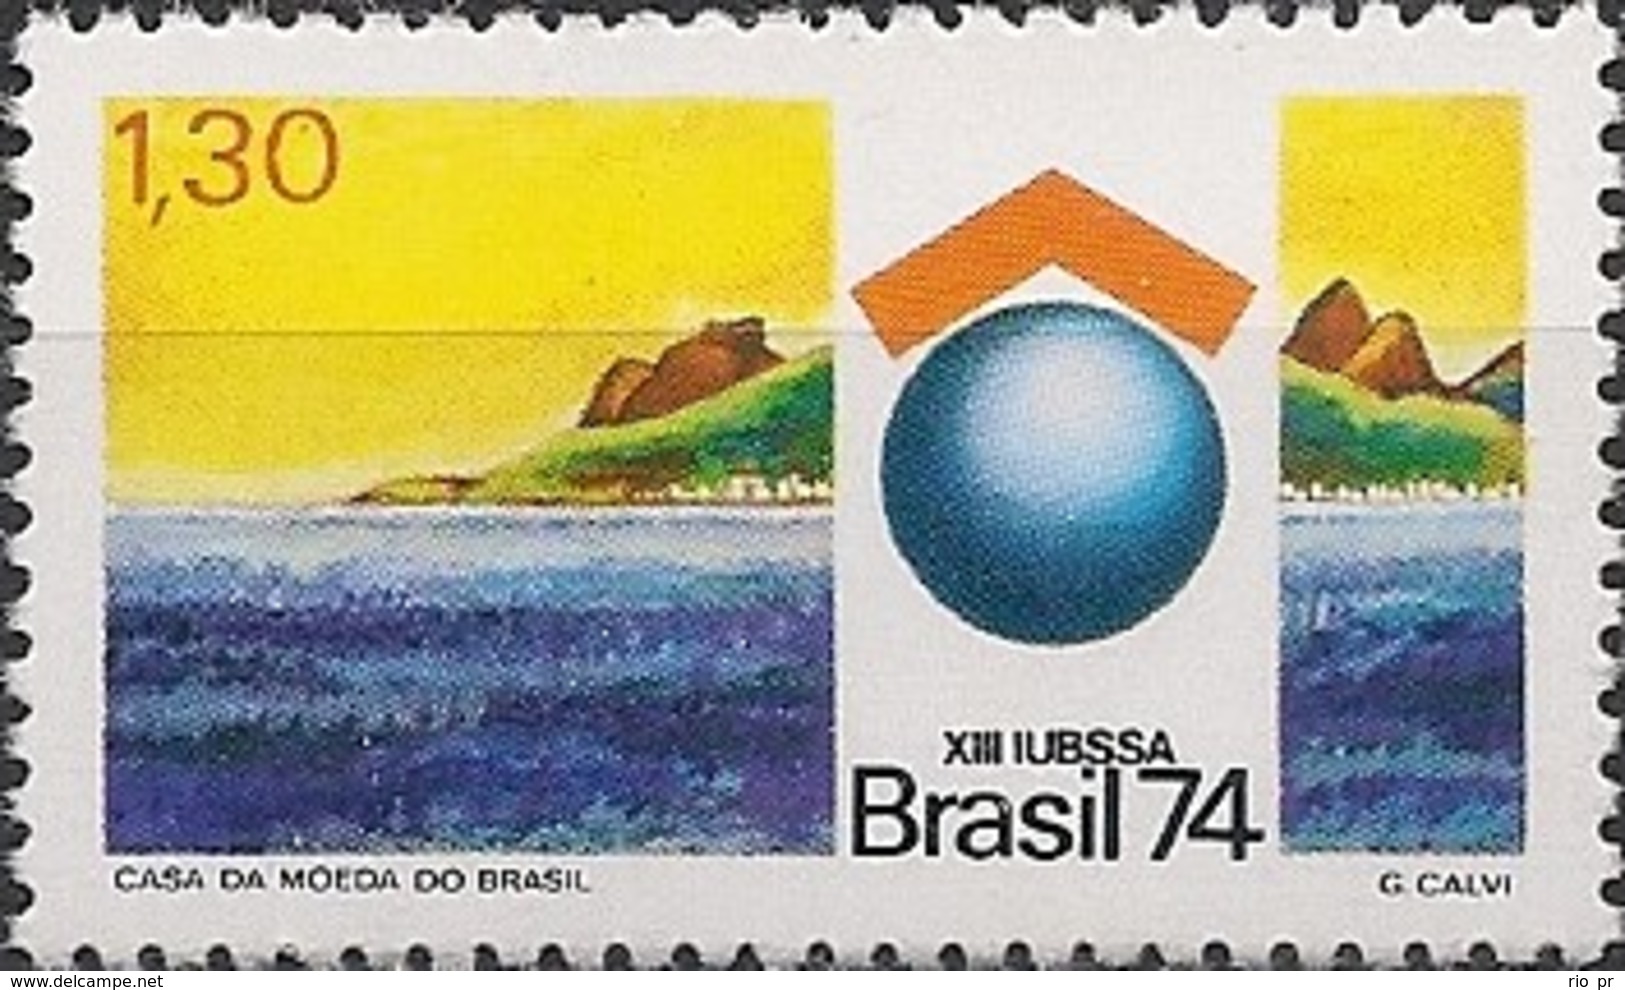 BRAZIL - 13th CONGRESS OF THE INTERNATIONAL UNION OF BUILDINGS AND SAVING SOCIETIES 1974 - MNH - Unused Stamps